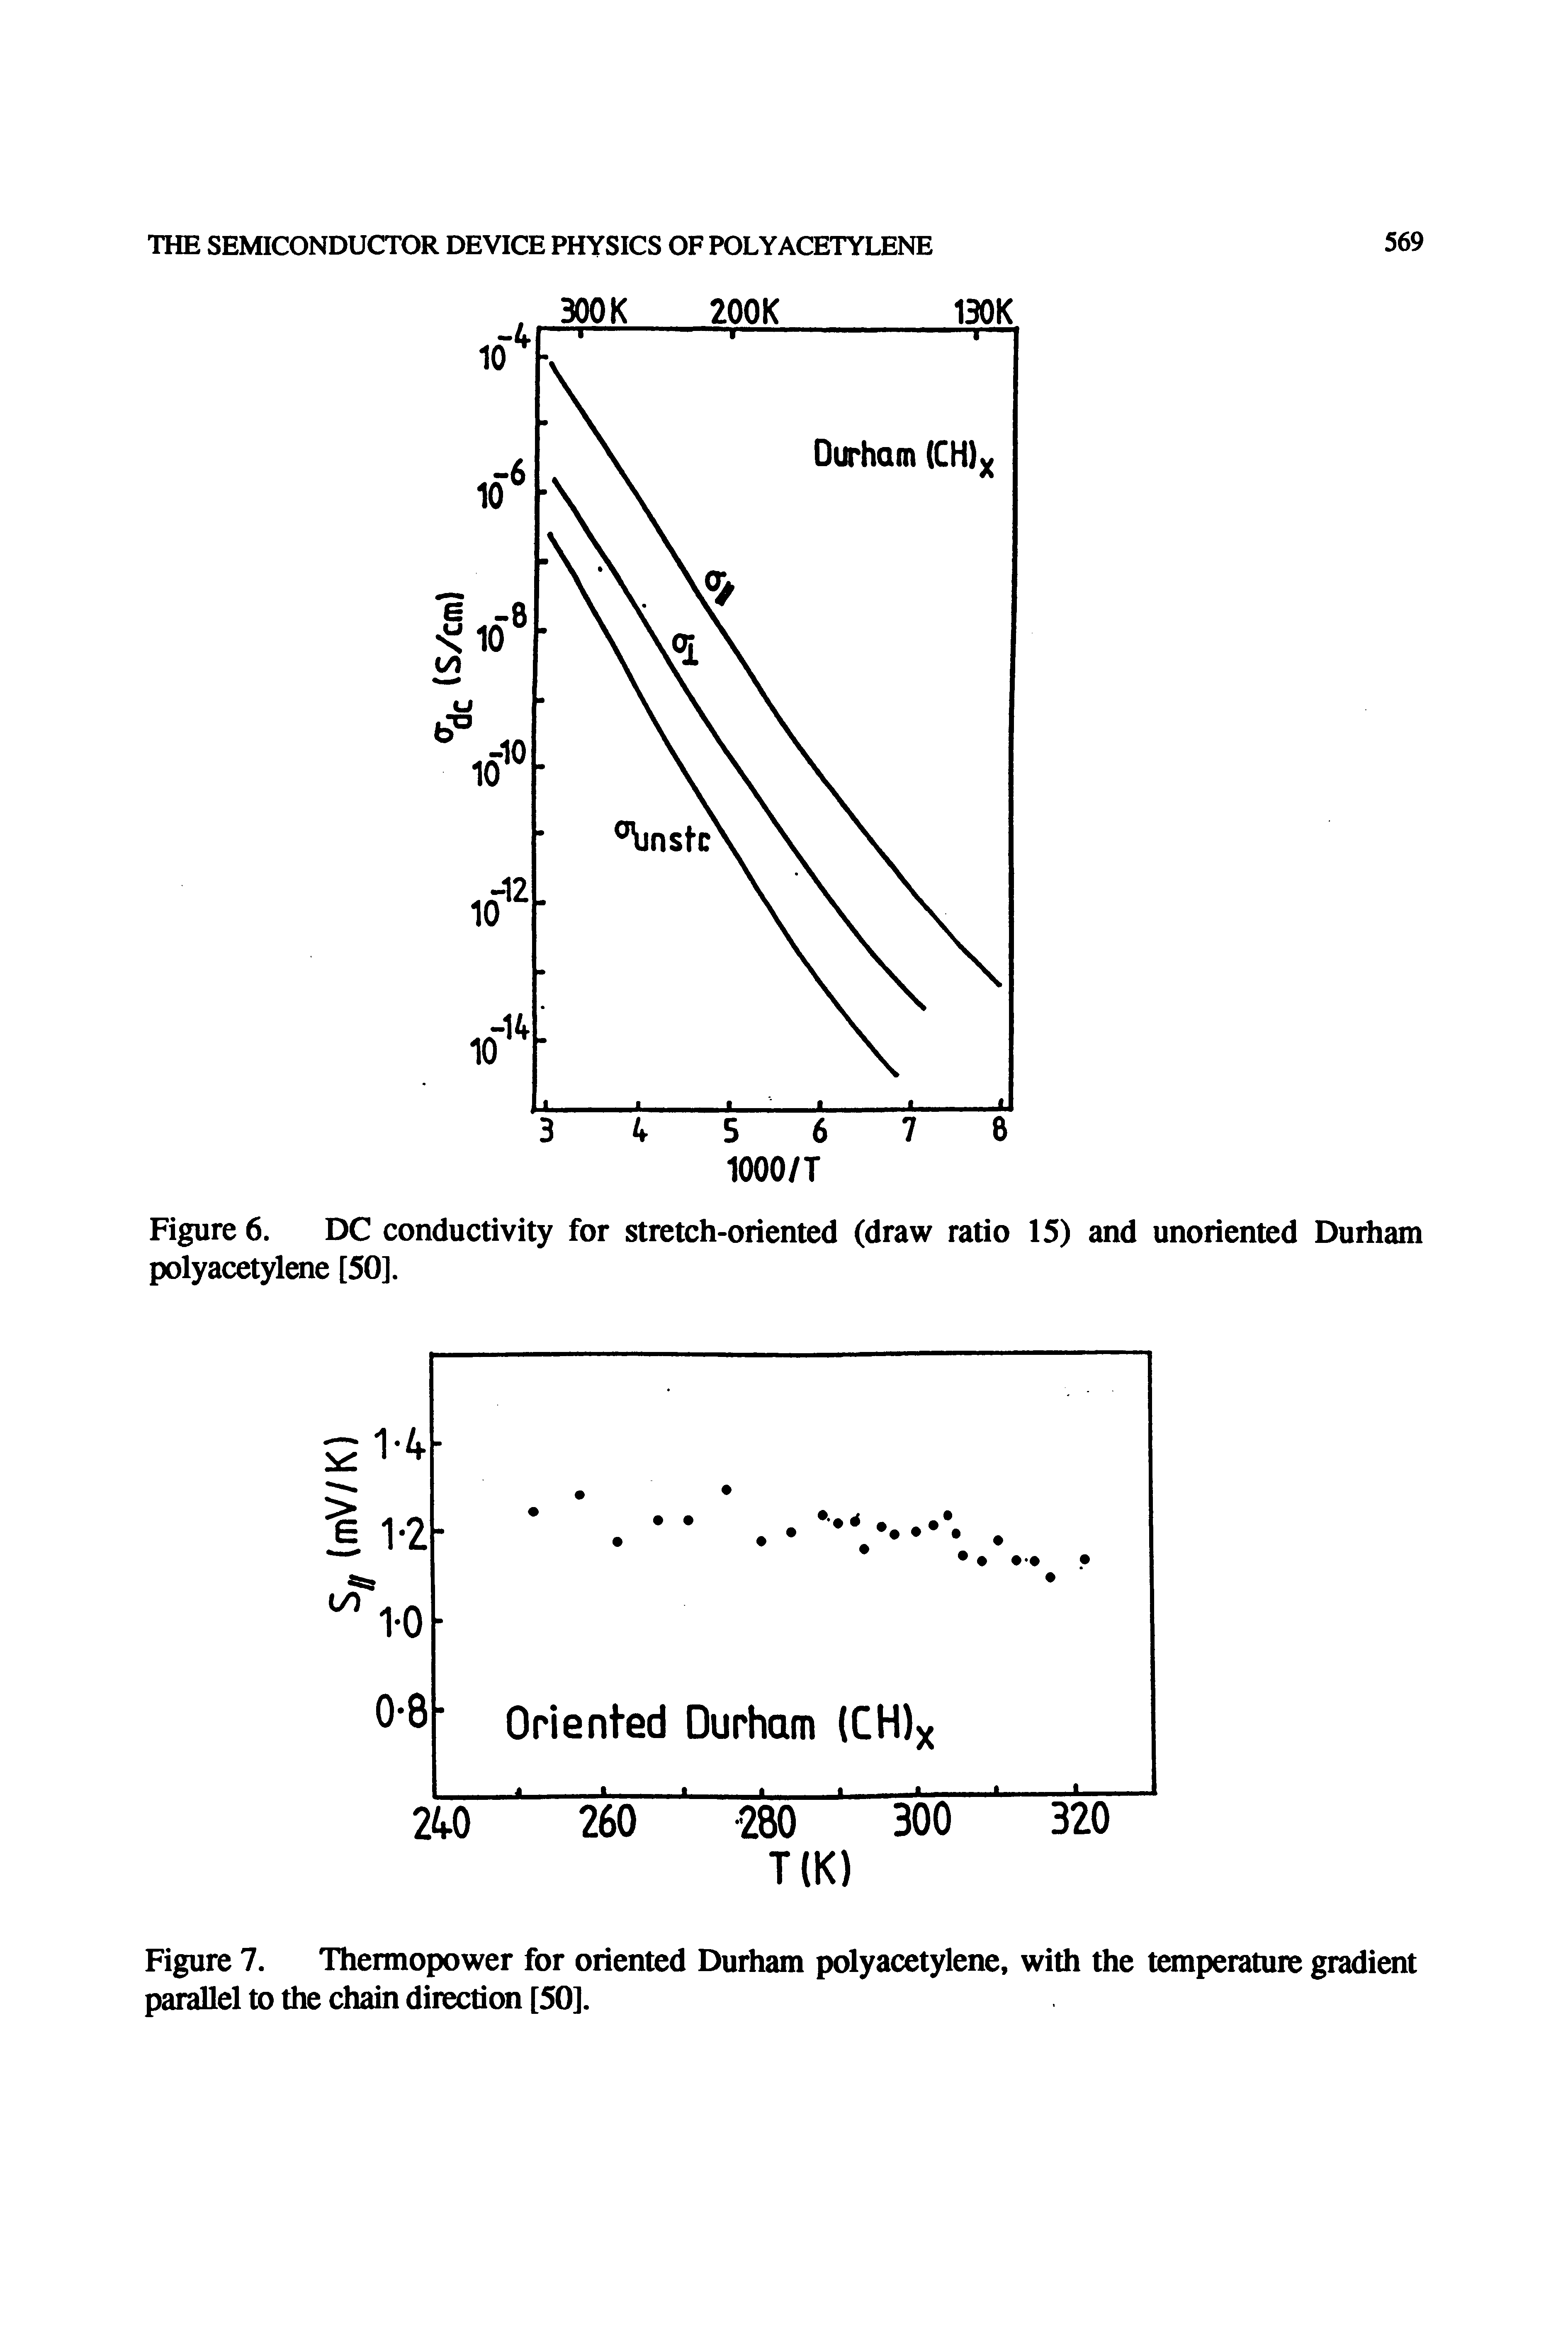 Figure 6. DC conductivity for stretch-oriented (draw ratio 15) and unoriented Durham polyacetylene [50].